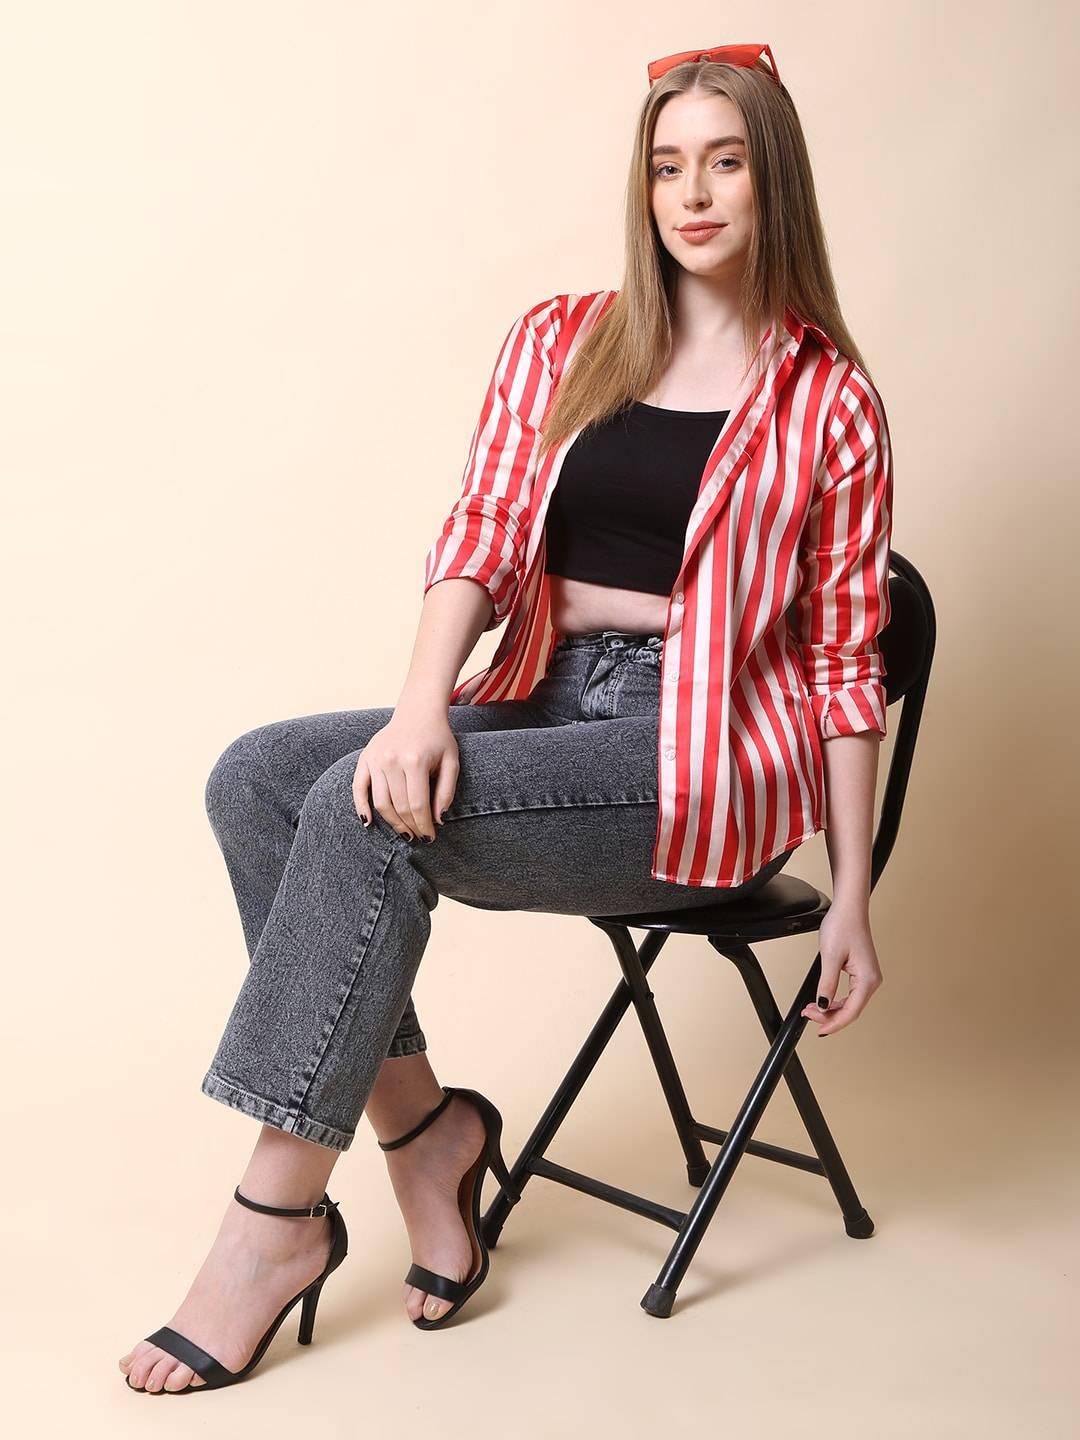 Red White Striped Shirt - Vooning